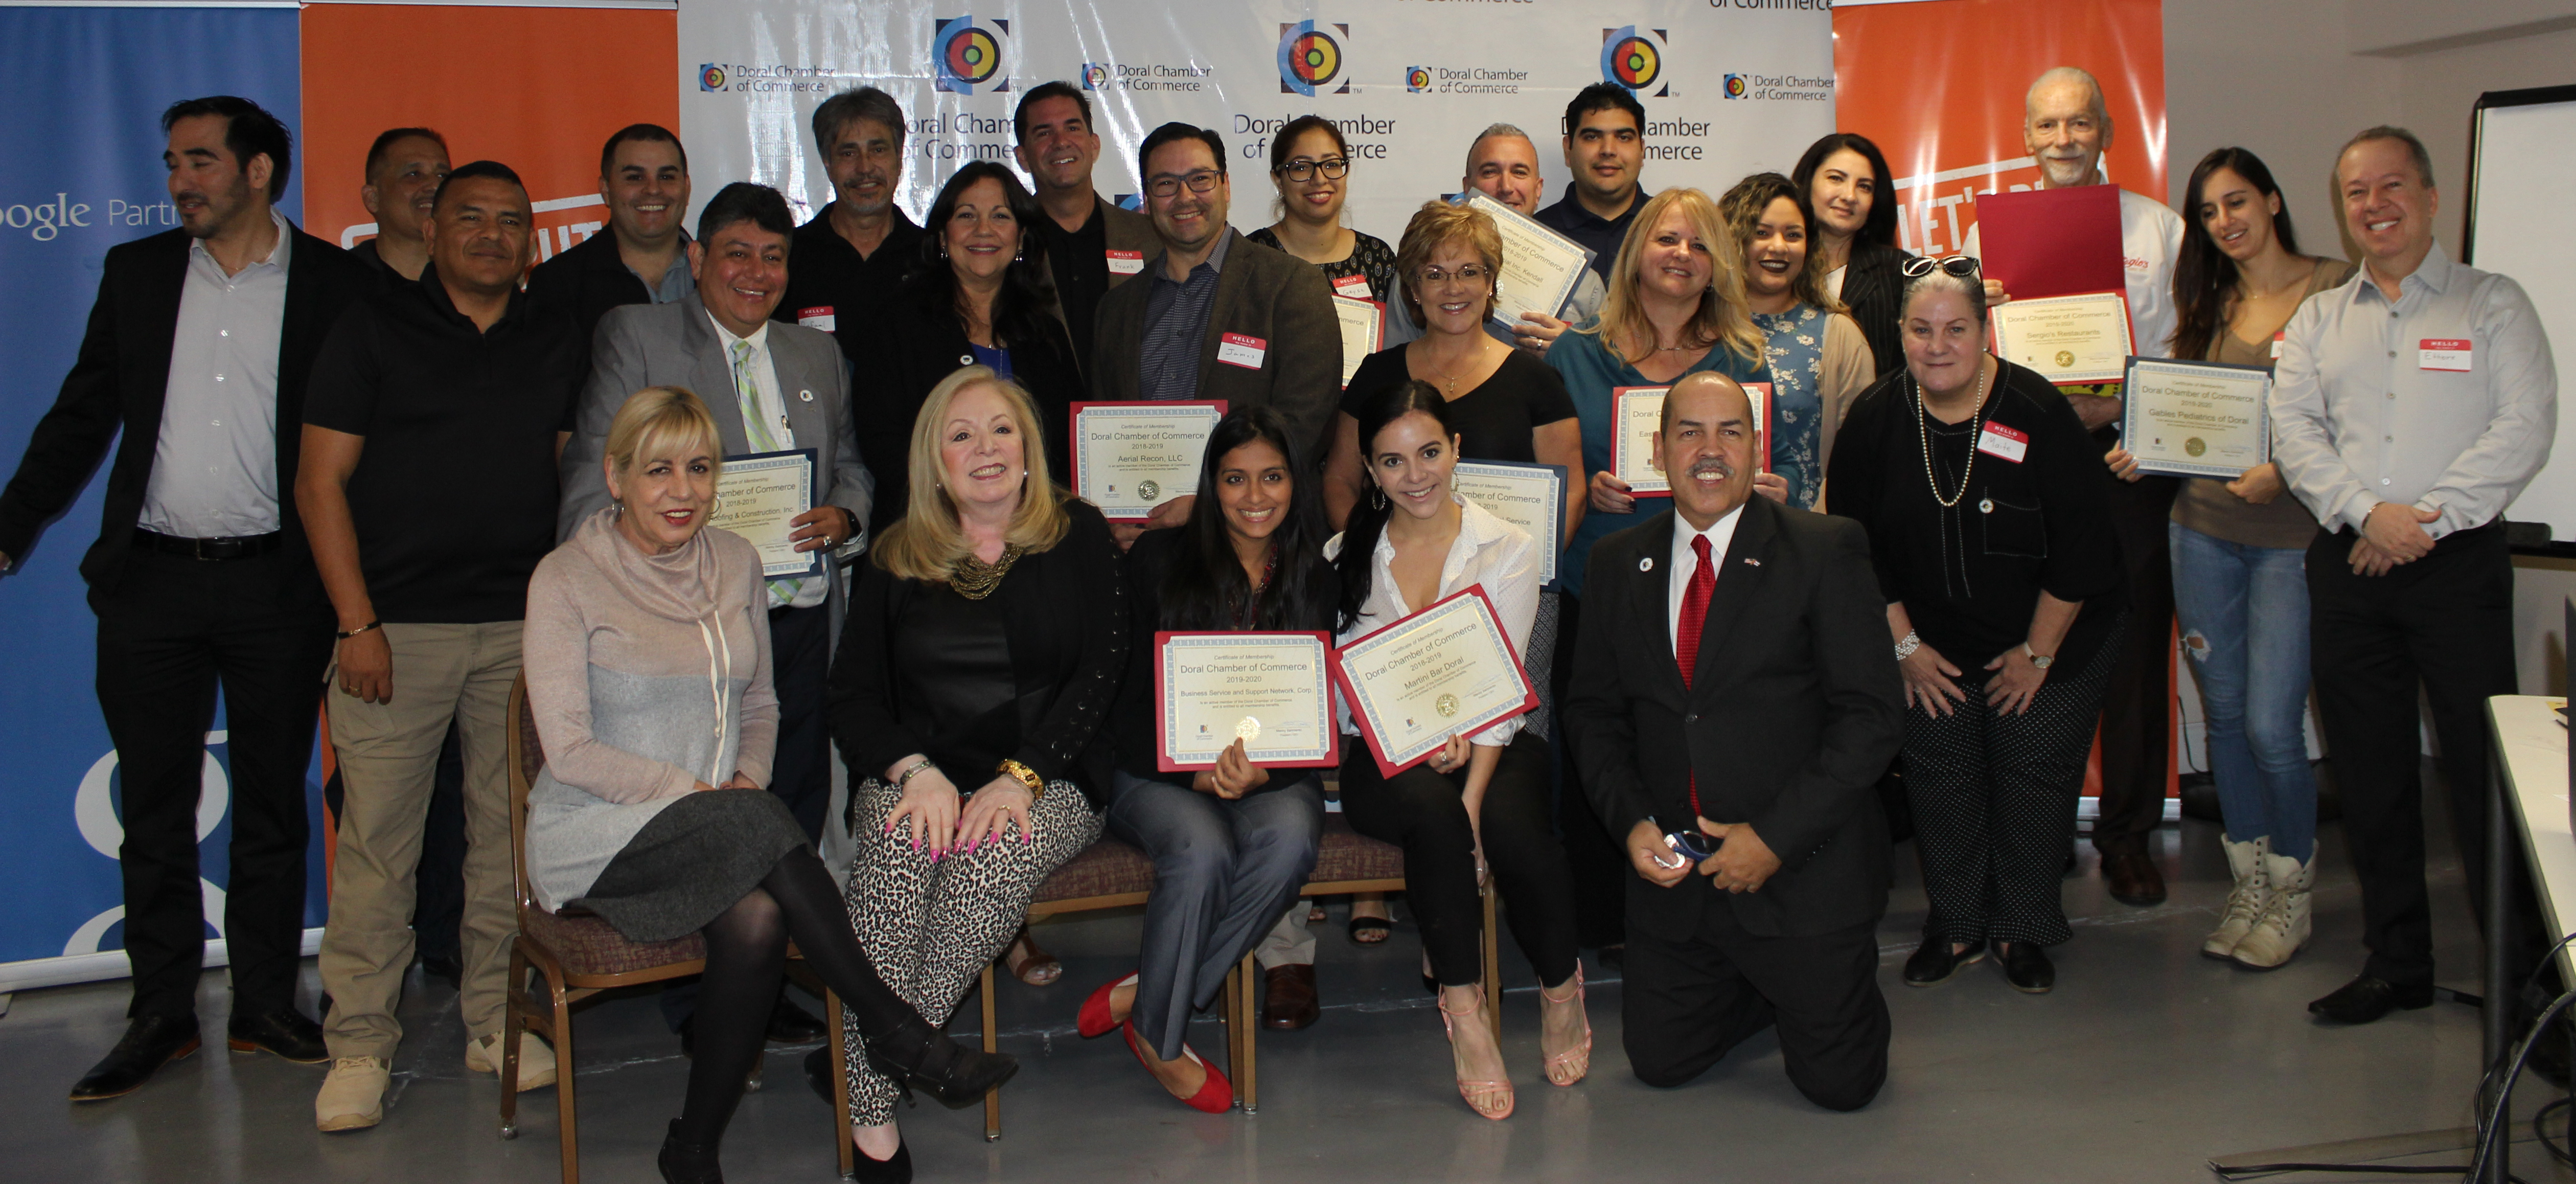 Doral Chamber of Commerce introduces Circle of Success event, group photo with all awarded for being new members.